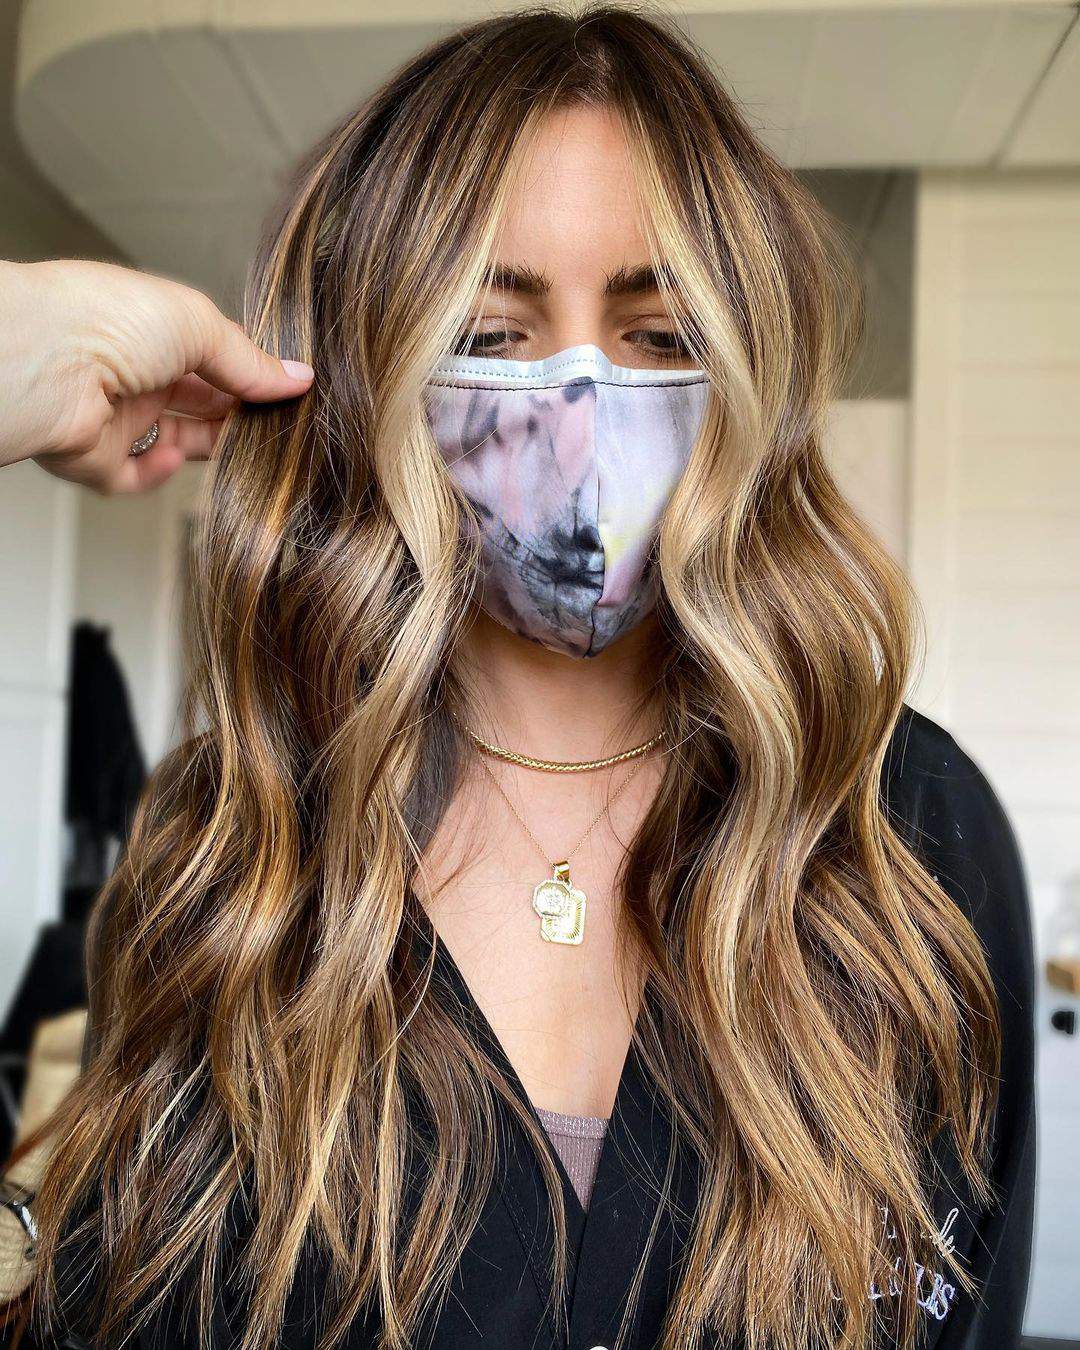 40+ Awesome Hairstyles For Girls With Long Hair images 36